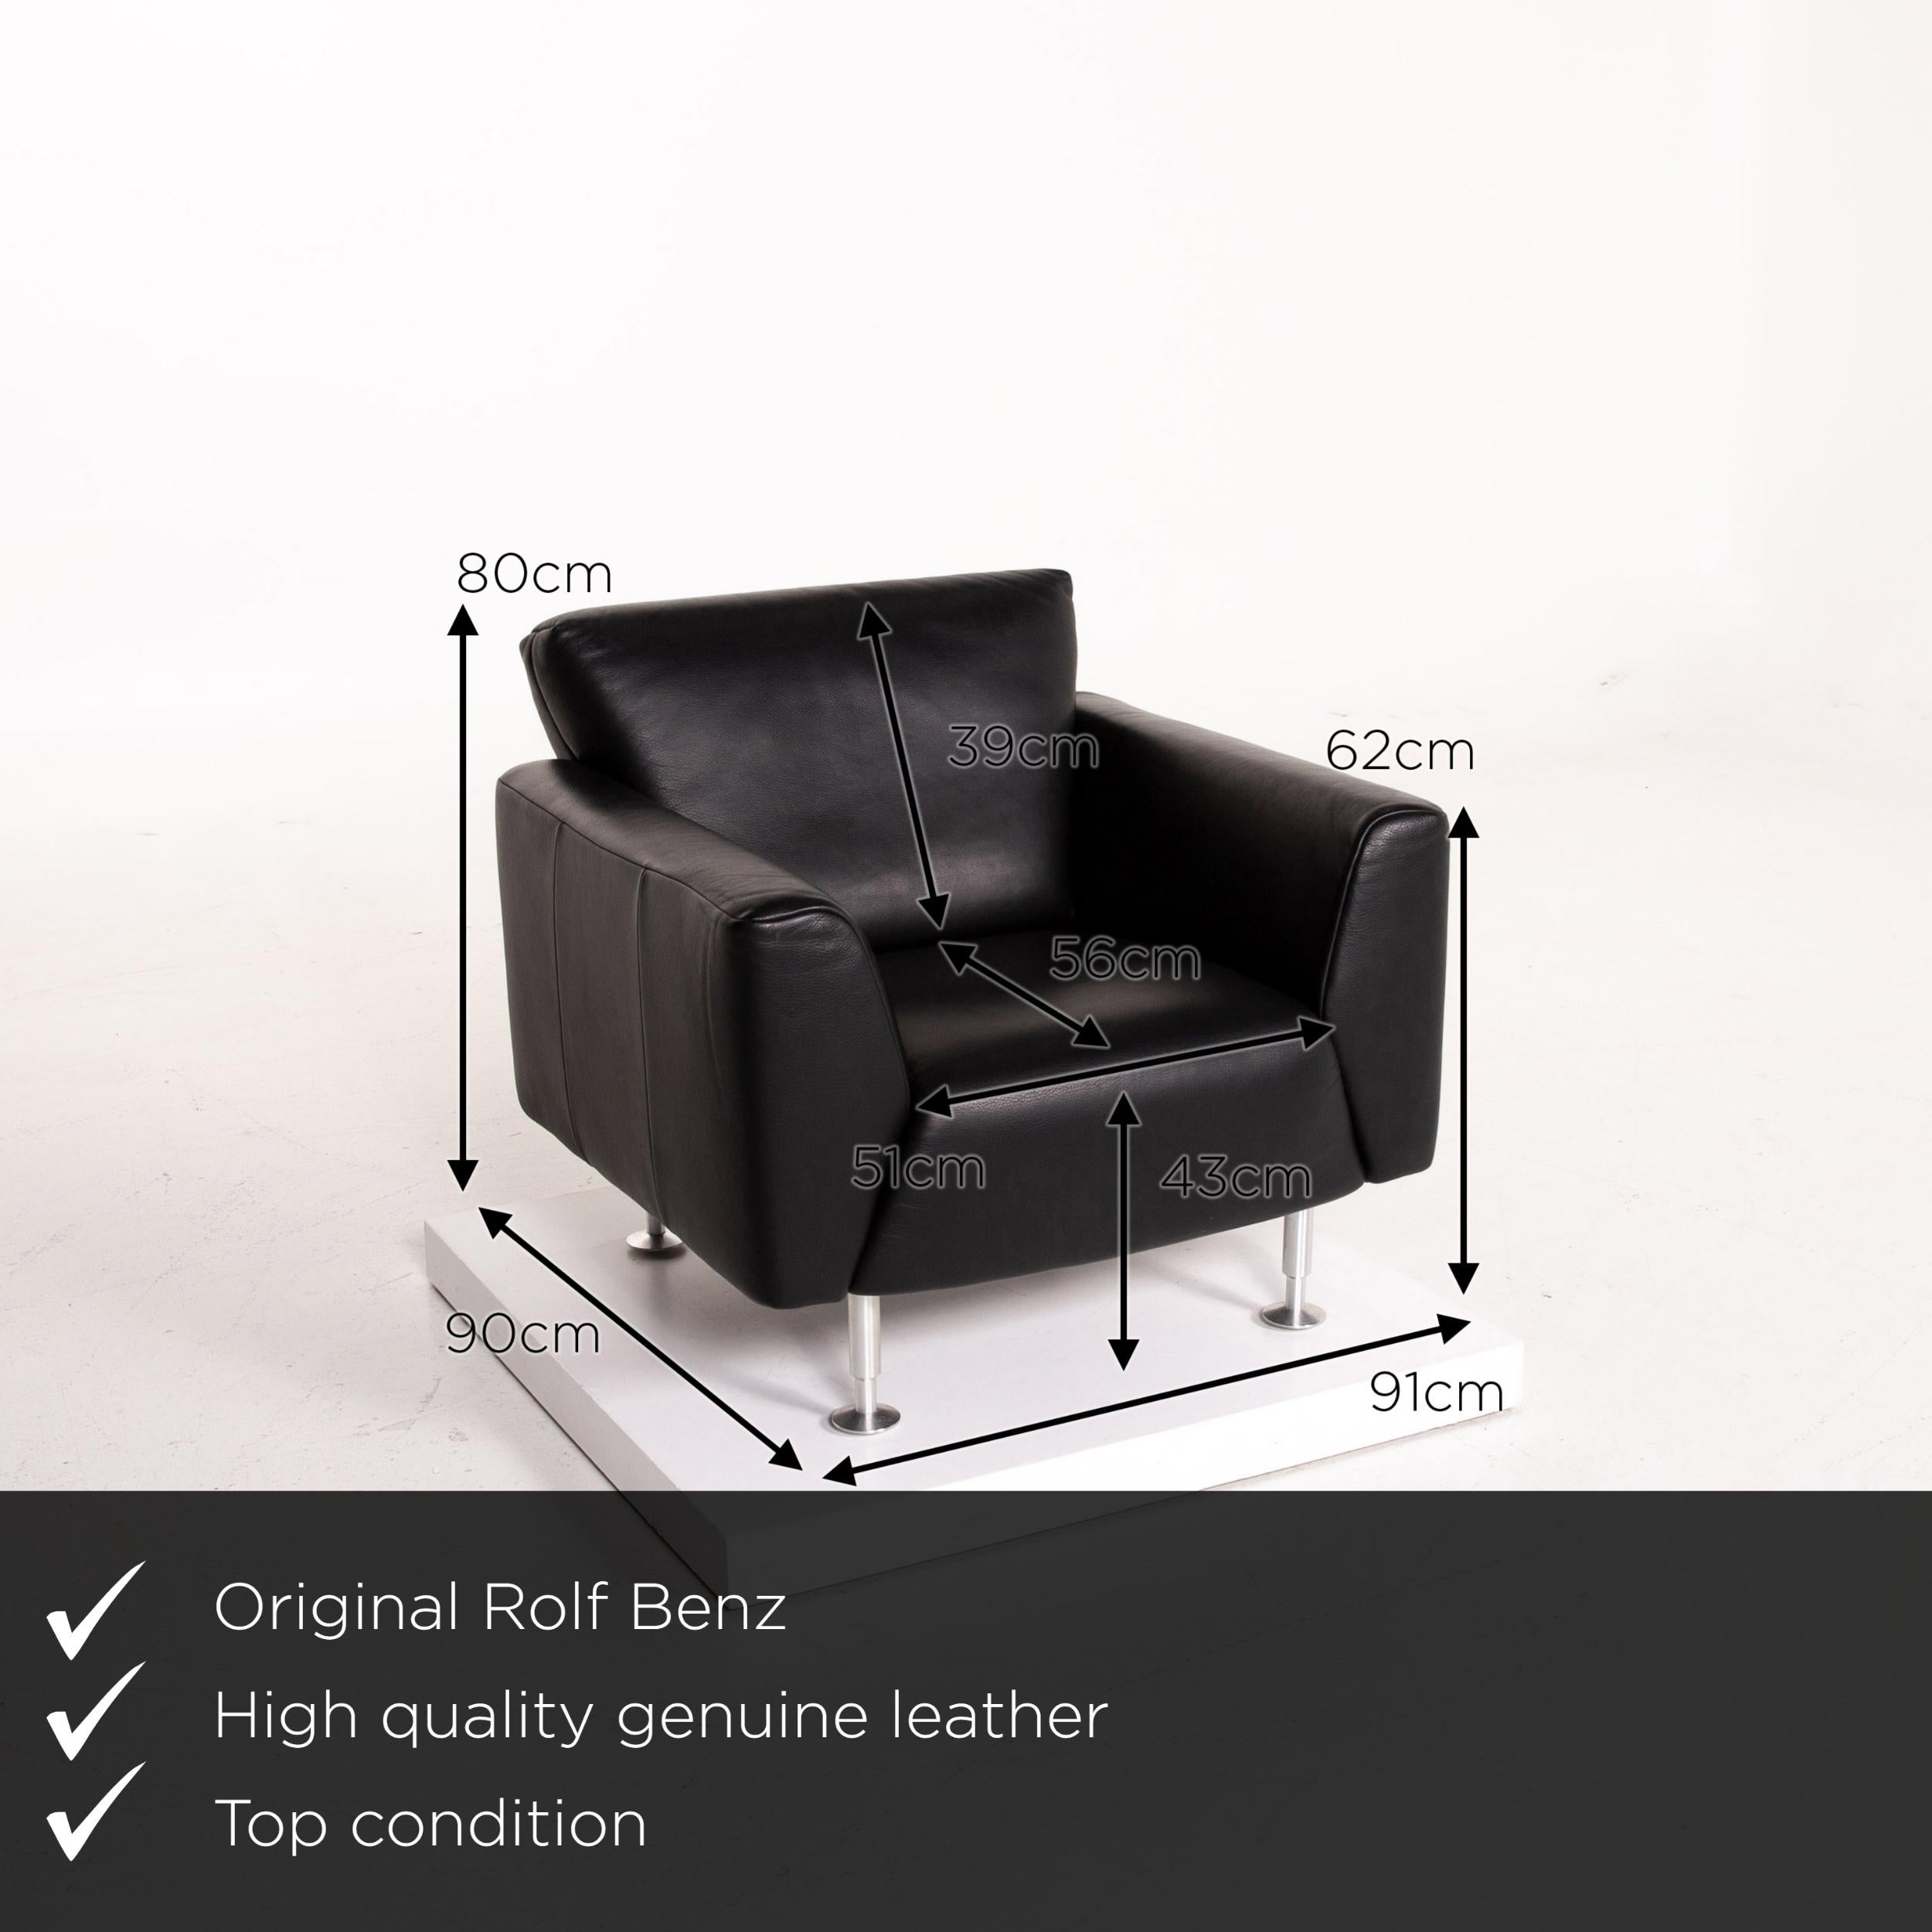 We present to you a Rolf Benz black leather armchair.
    
 

 Product measurements in centimeters:
 

Depth 90
Width 91
Height 80
Seat height 43
Rest height 62
Seat depth 56
Seat width 51
Back height 39.